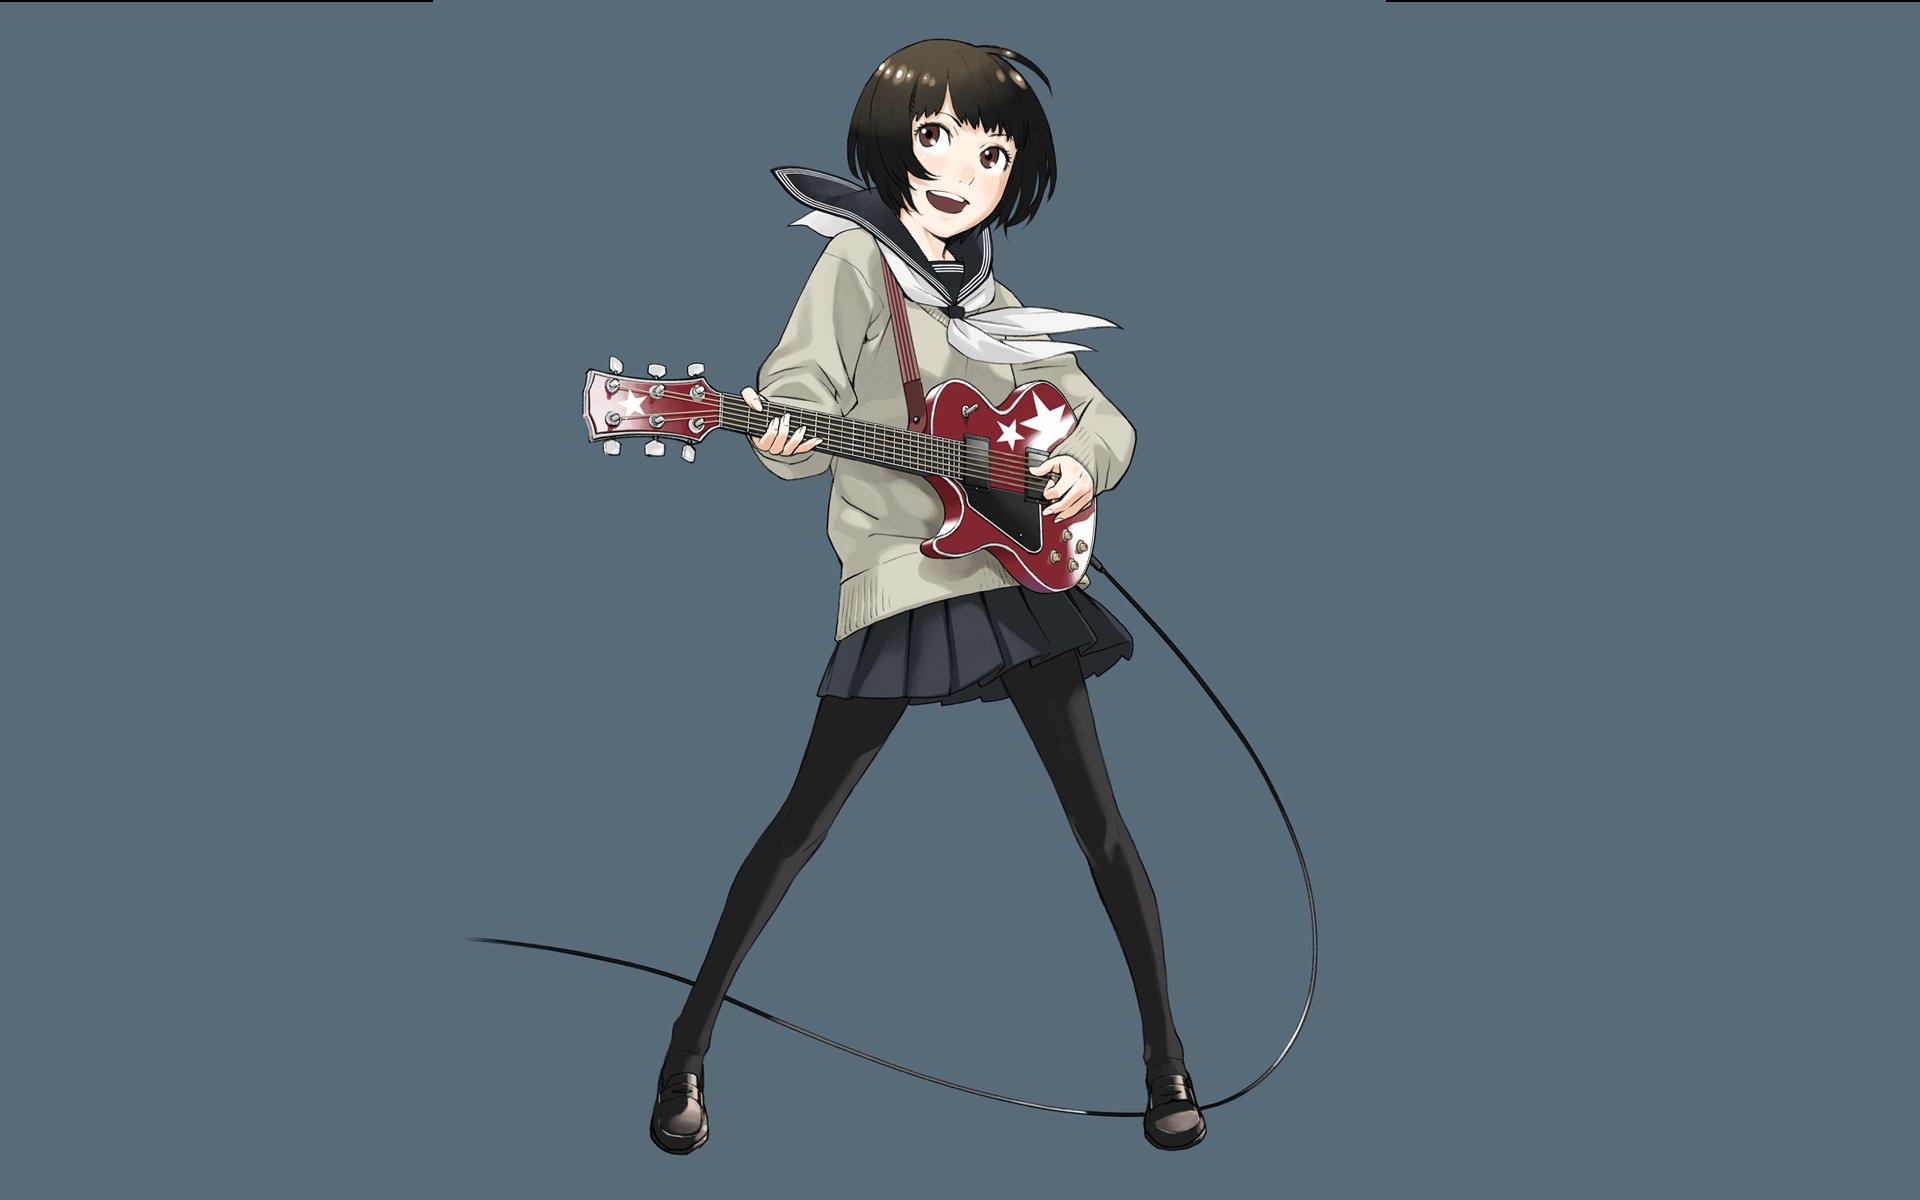 Girl with guitar, wallpaper on the desktop, DH: 1920x1200